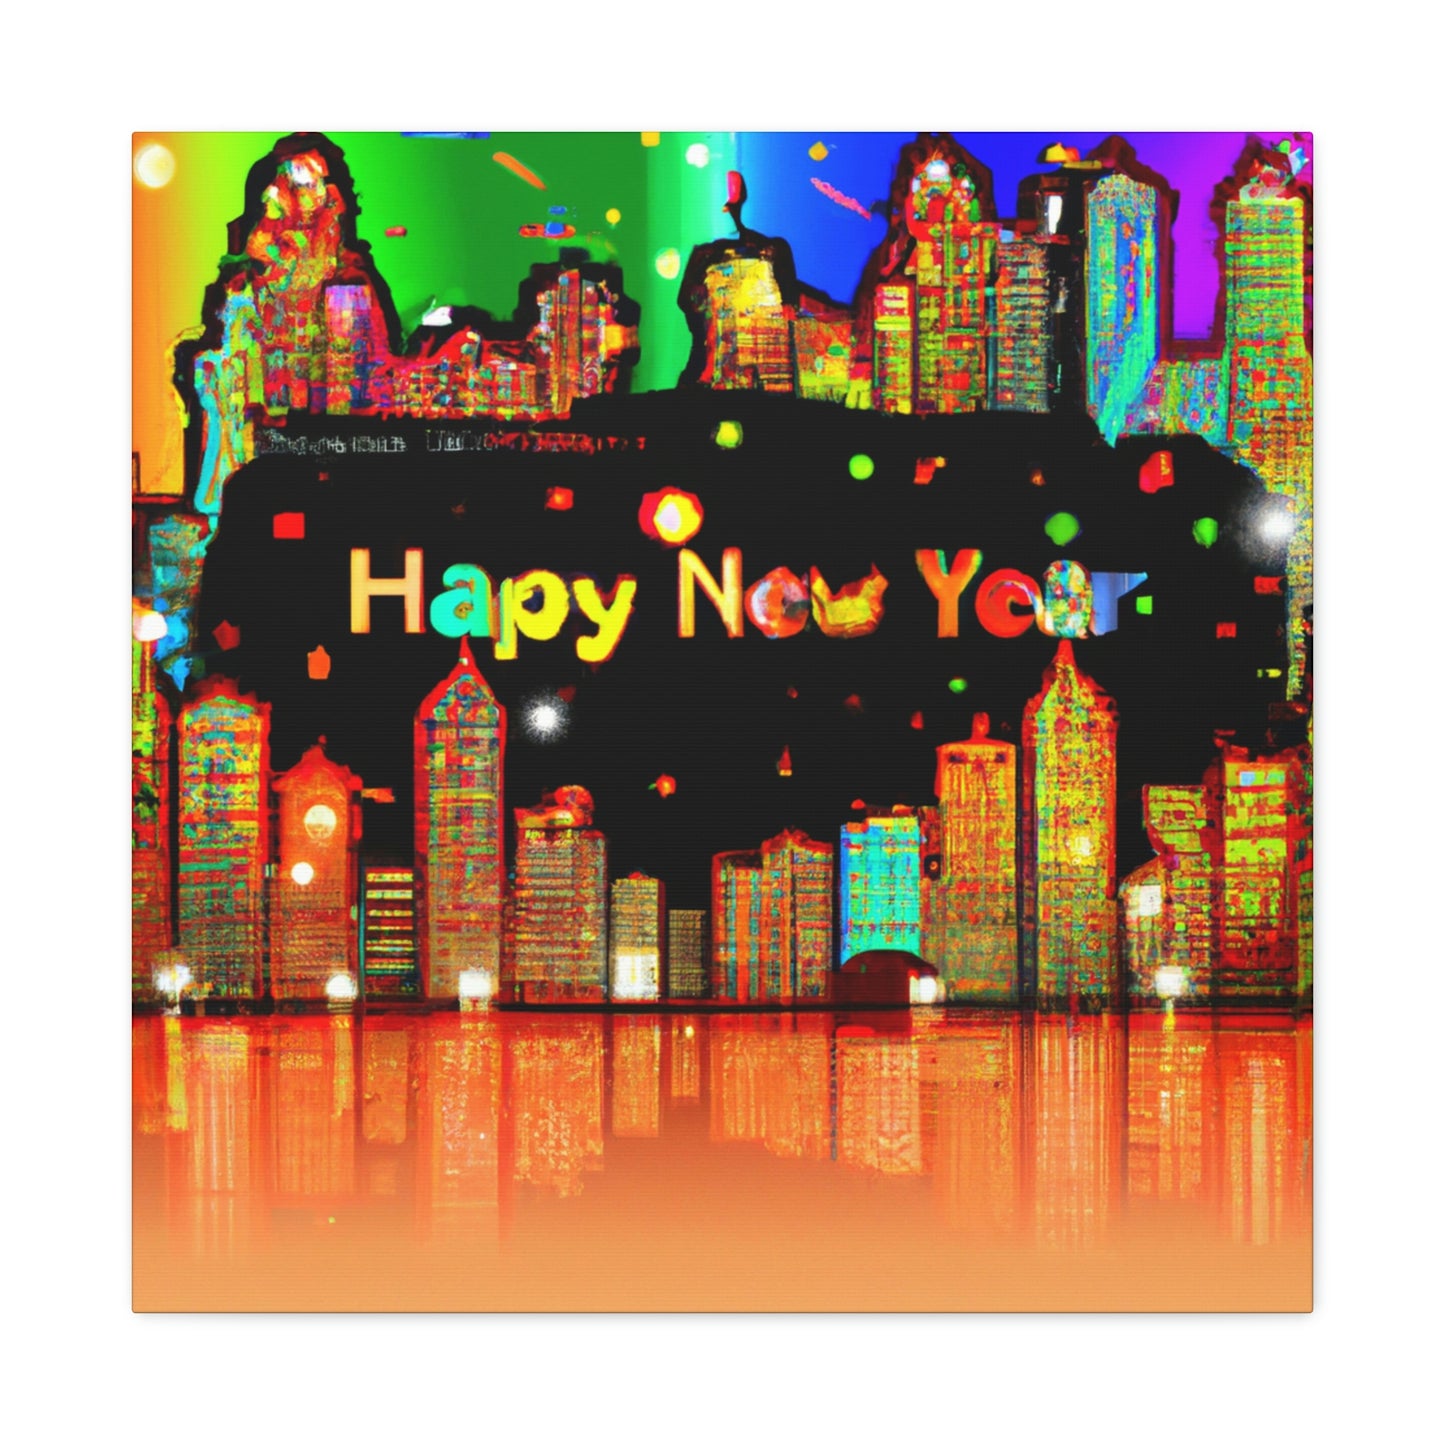 "New Year Lights: City of Color" - Canvas